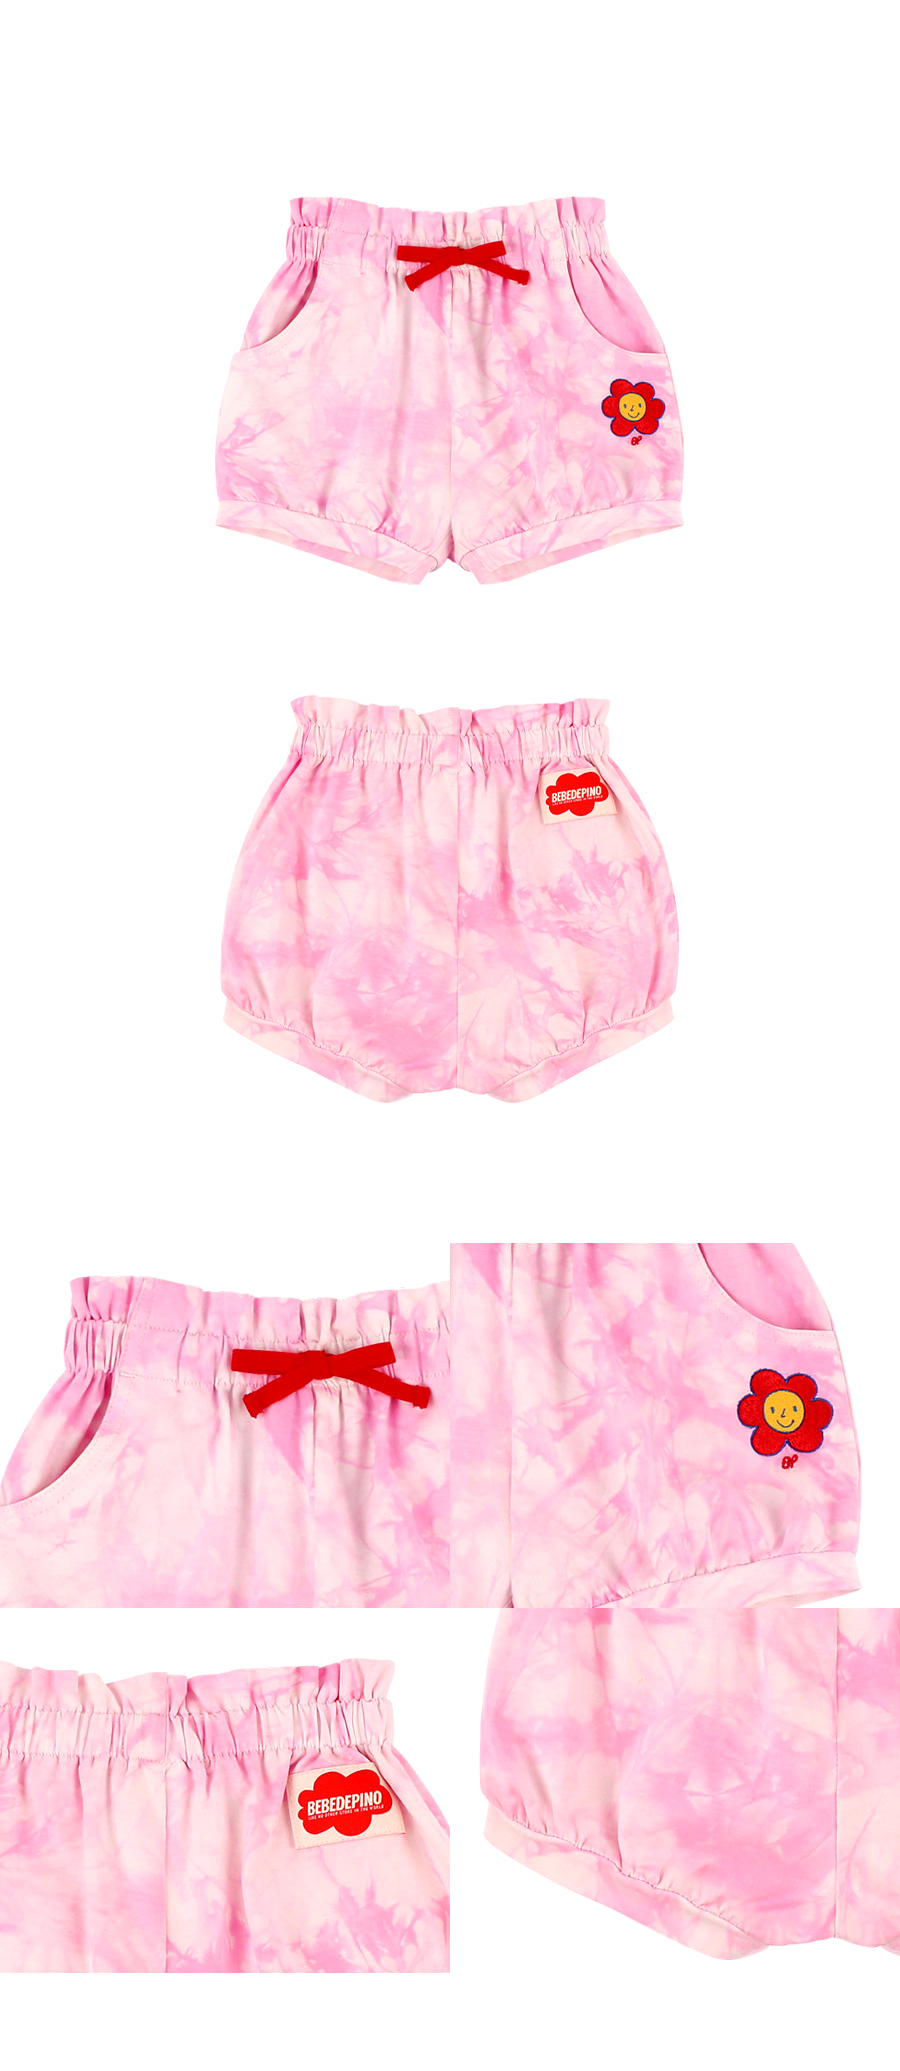 Smile flower baby tie-dyeing ruffle shorts 상세 이미지